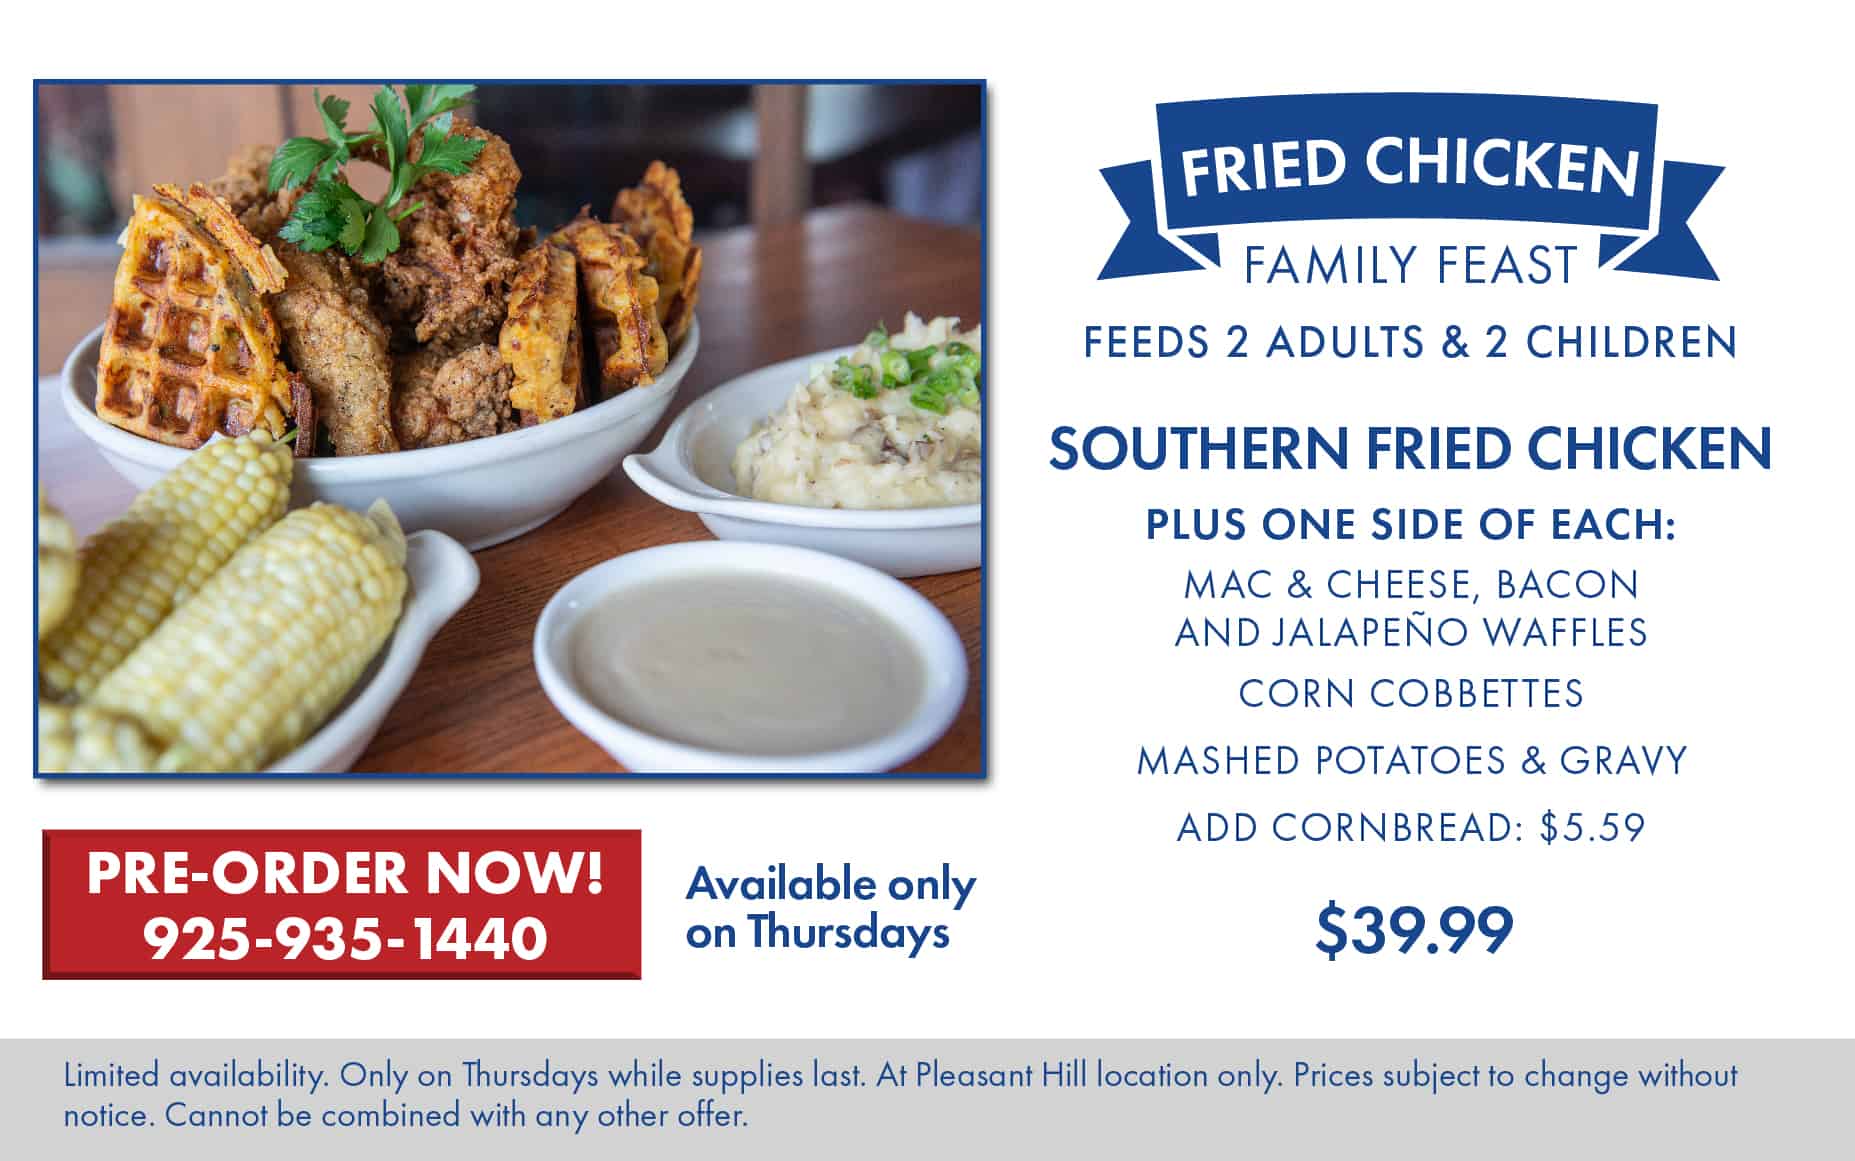 Southern Fried Chicken Family Feast